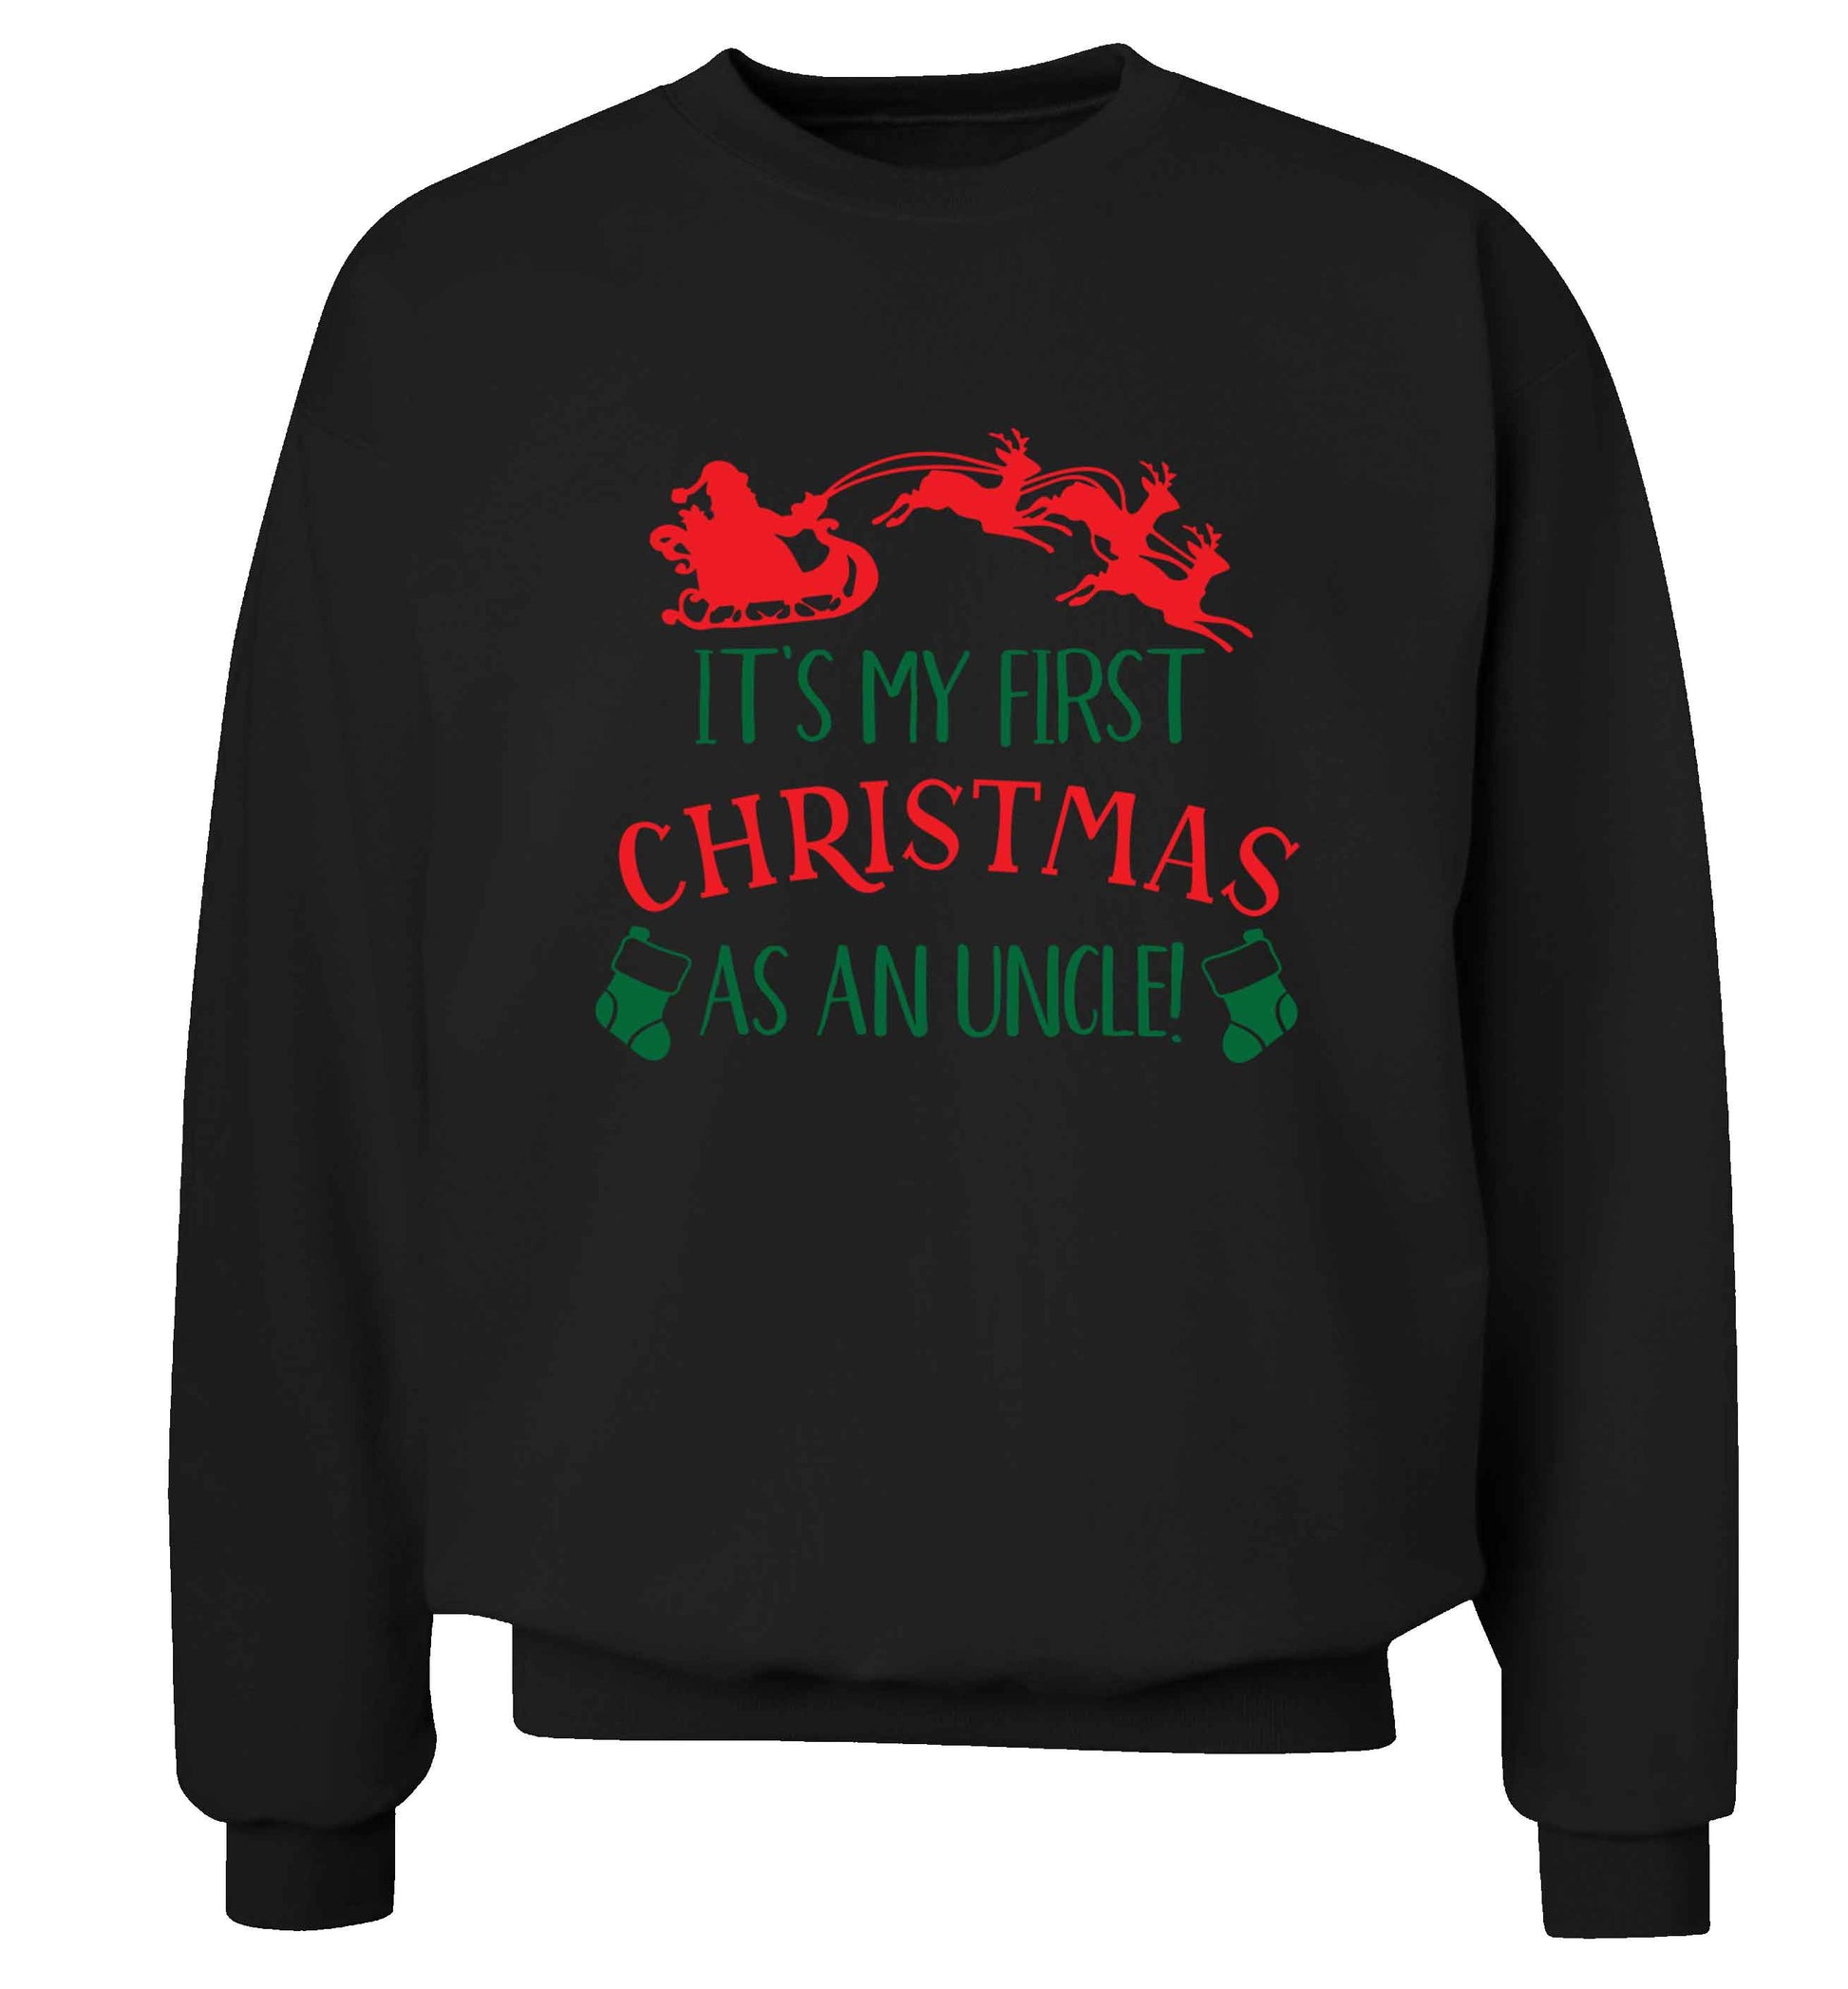 It's my first Christmas as an uncle! Adult's unisex black Sweater 2XL